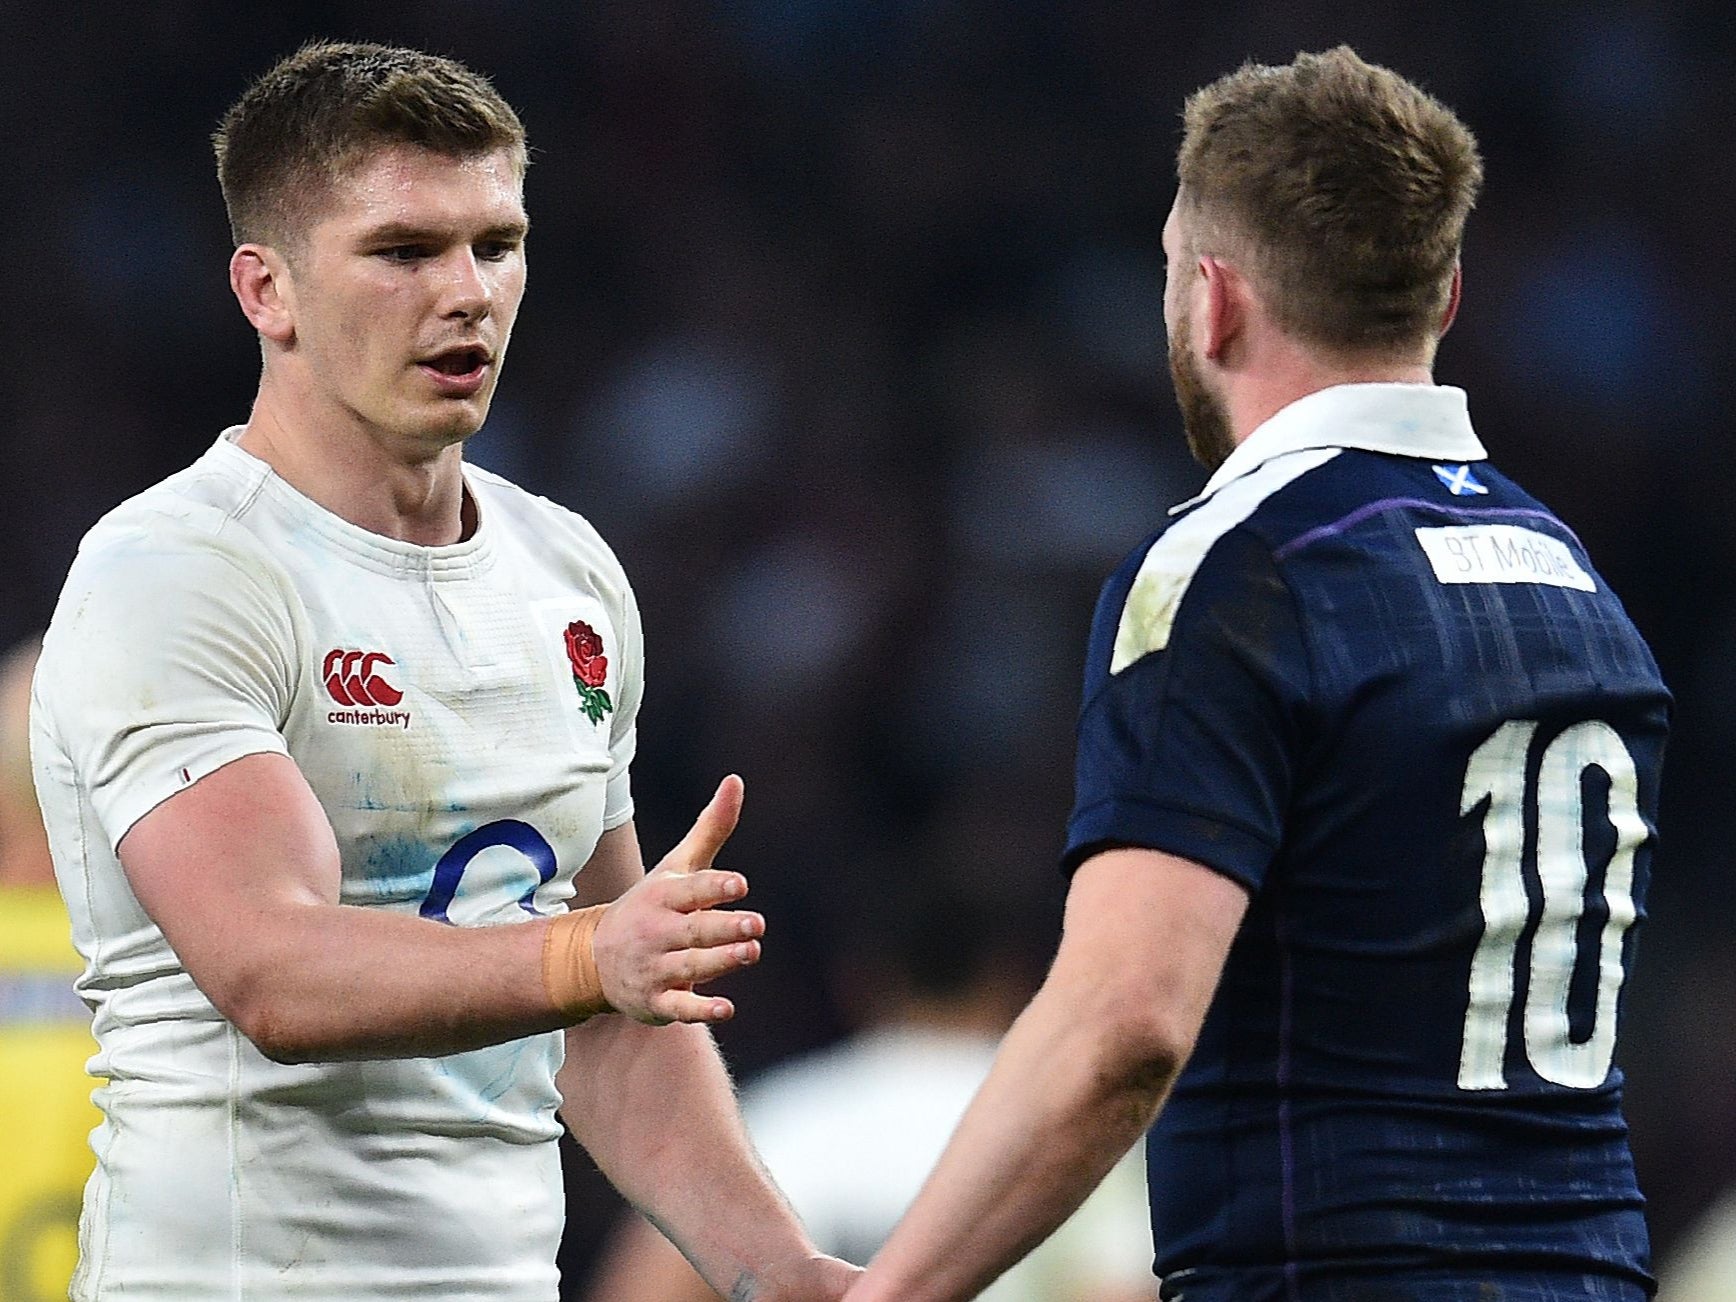 England’s Owen Farrell (left) and Scotland’s Finn Russell will be deployed at fly-half